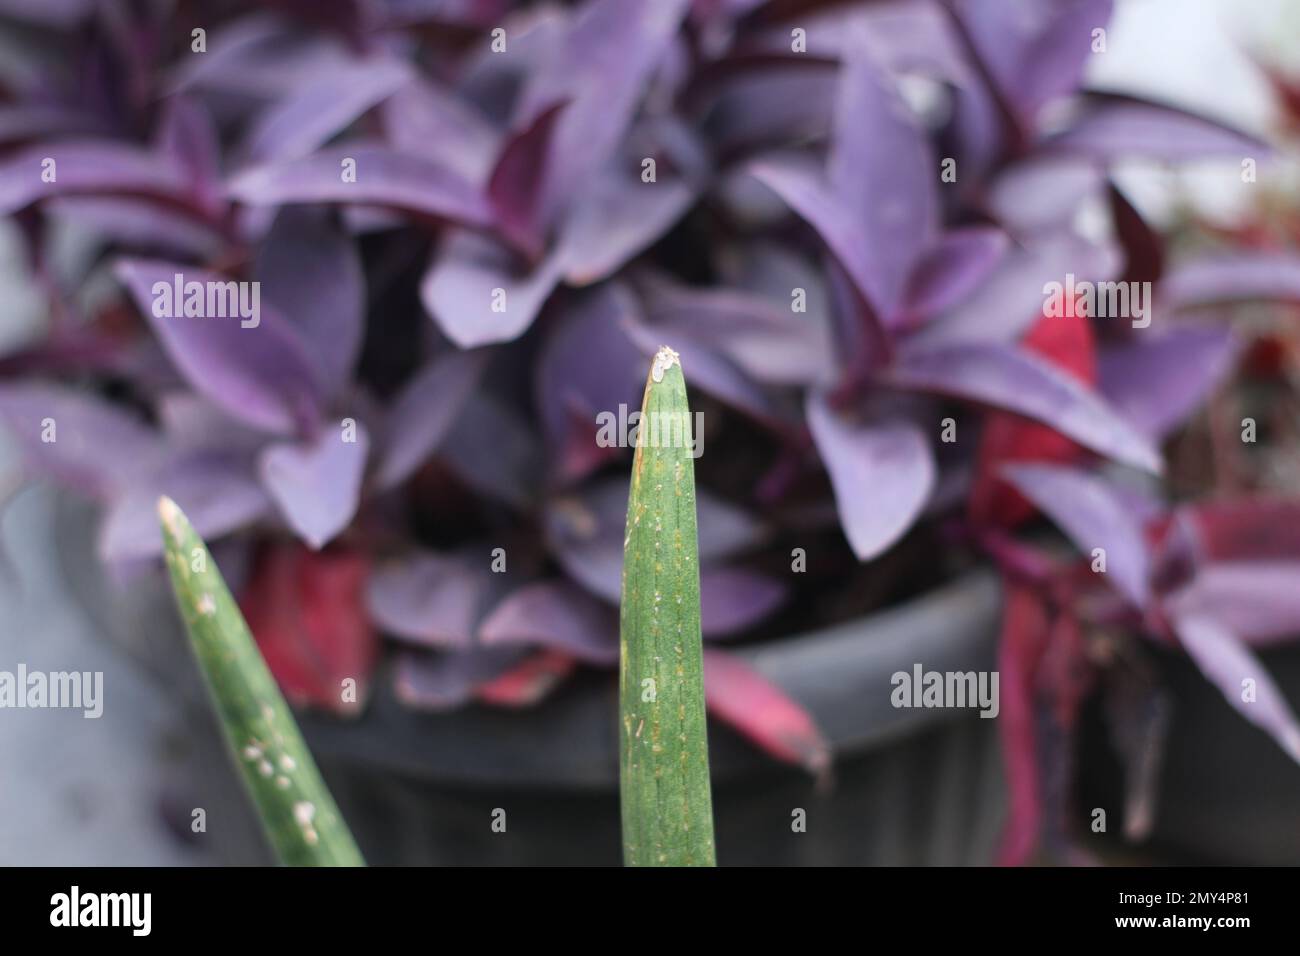 Tradescantia Pallida or better known as Adam Hawa or also called Purple Heart, is a type of ornamental plant that is cheap, easy to care for and easy Stock Photo